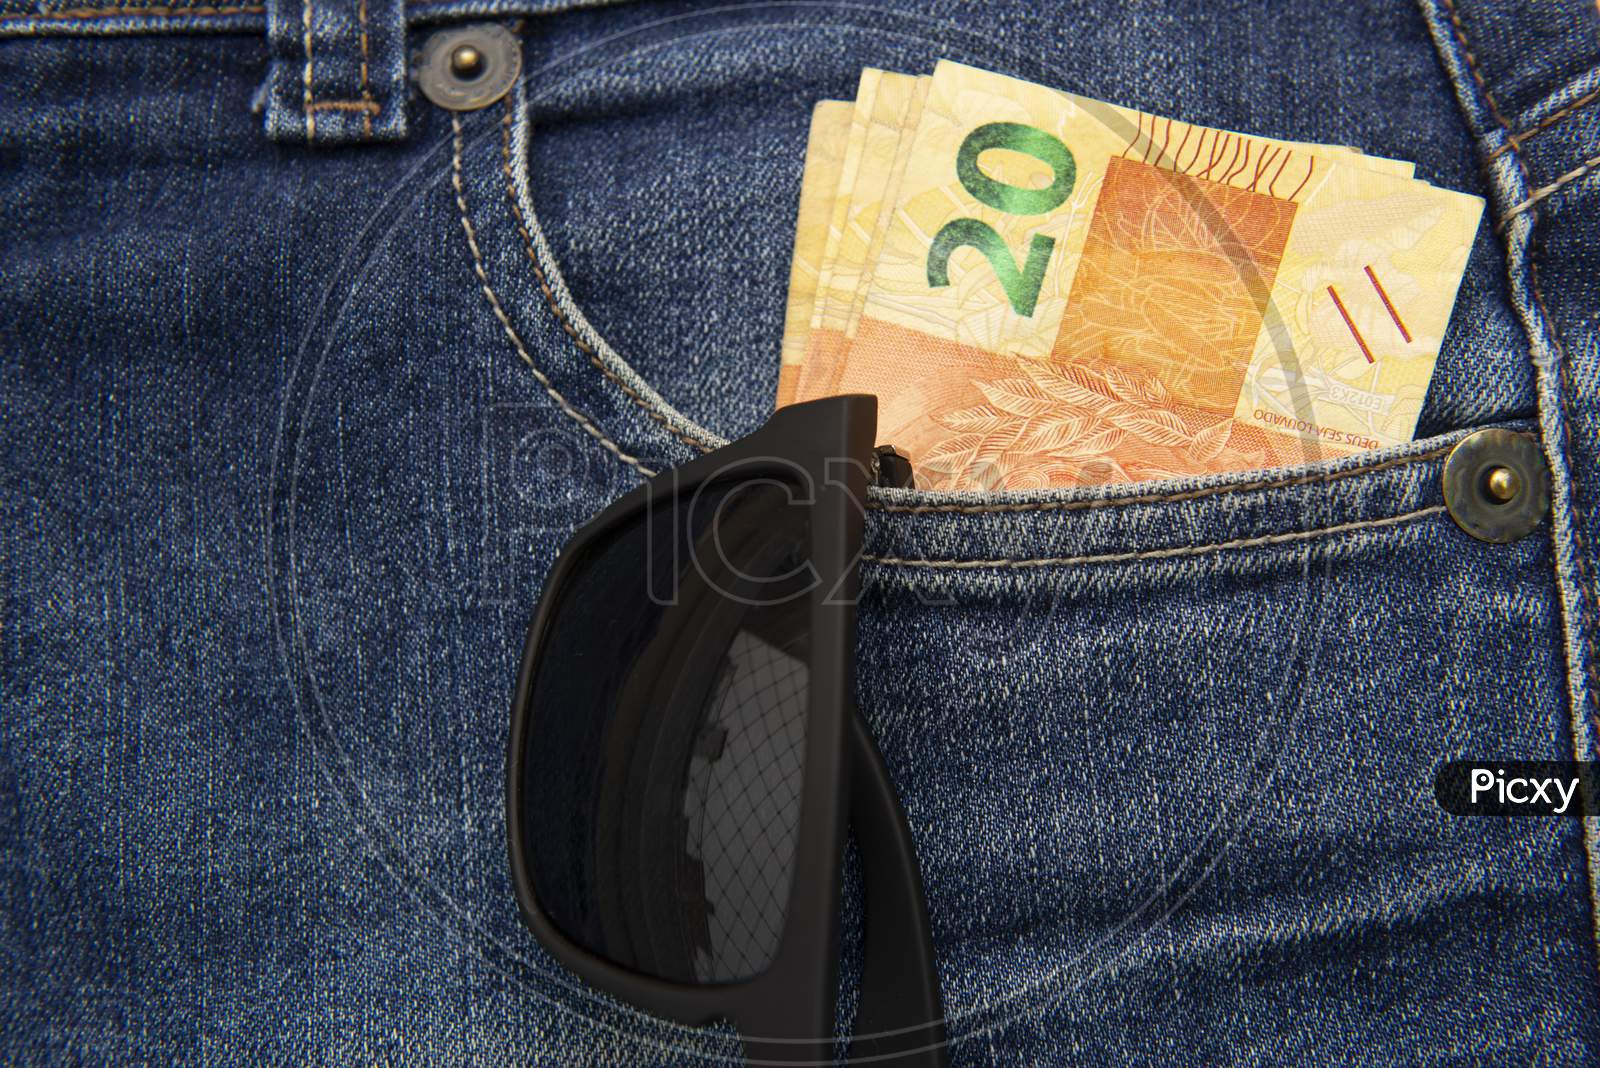 Close Up Of Several 20 Reais Bills In The Pants Pocket. Sunglasses Hanging In The Pocket. Money In Pocket Concept. Money-Rich Person Or Money To Spare.